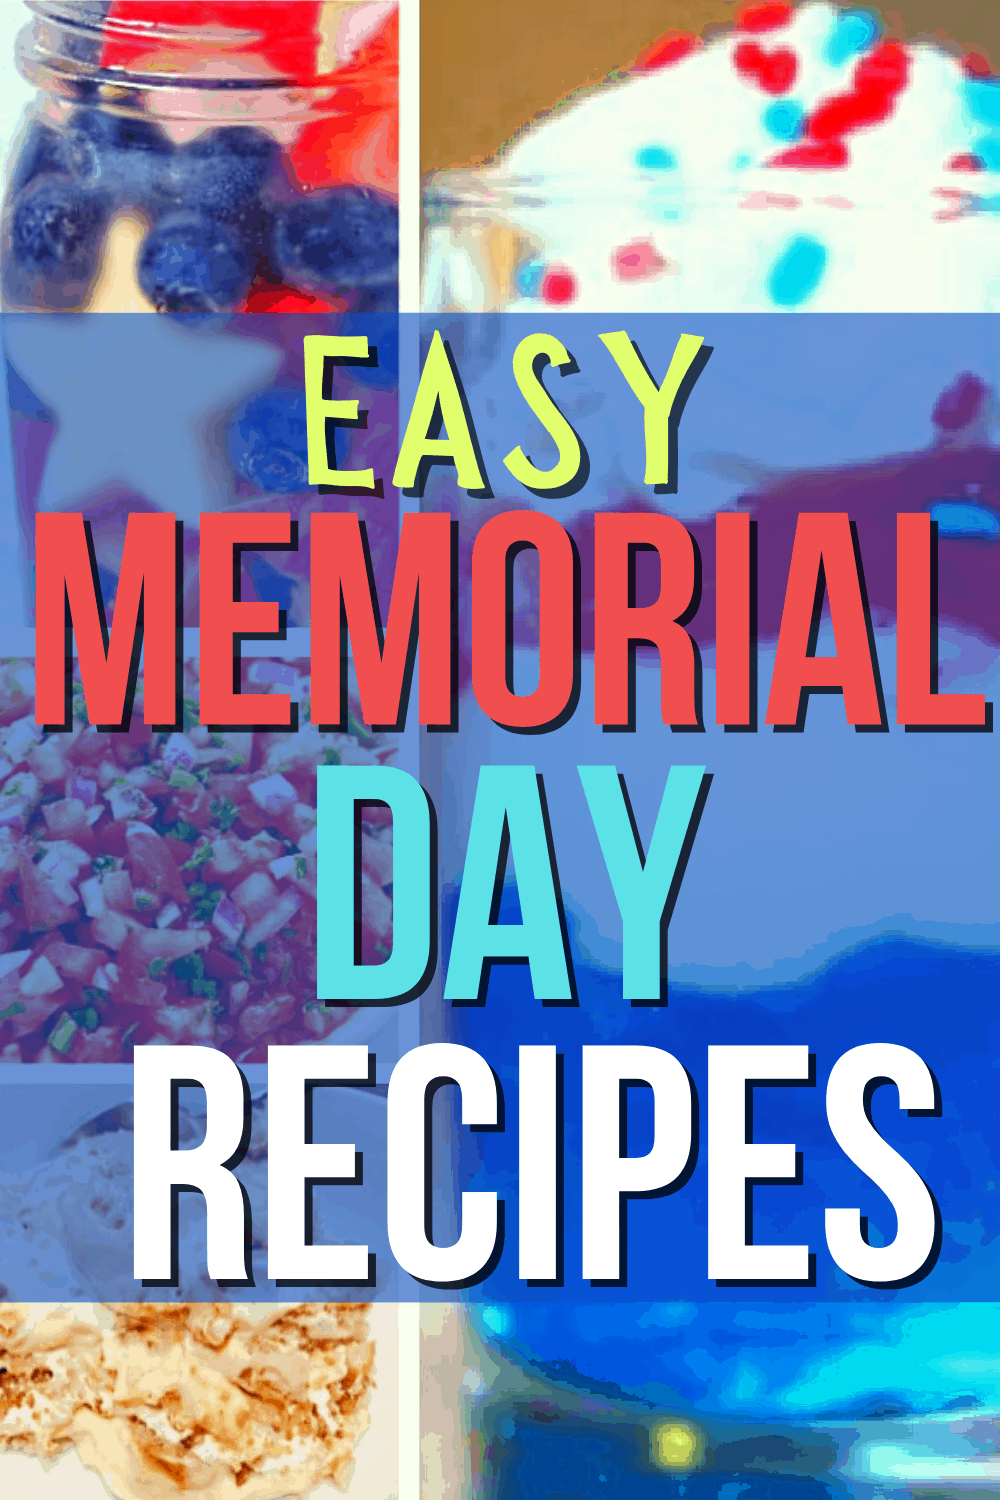 Memorial day party food and Memorial Day picnic ideas (text over different images of Memorial Day recipes)